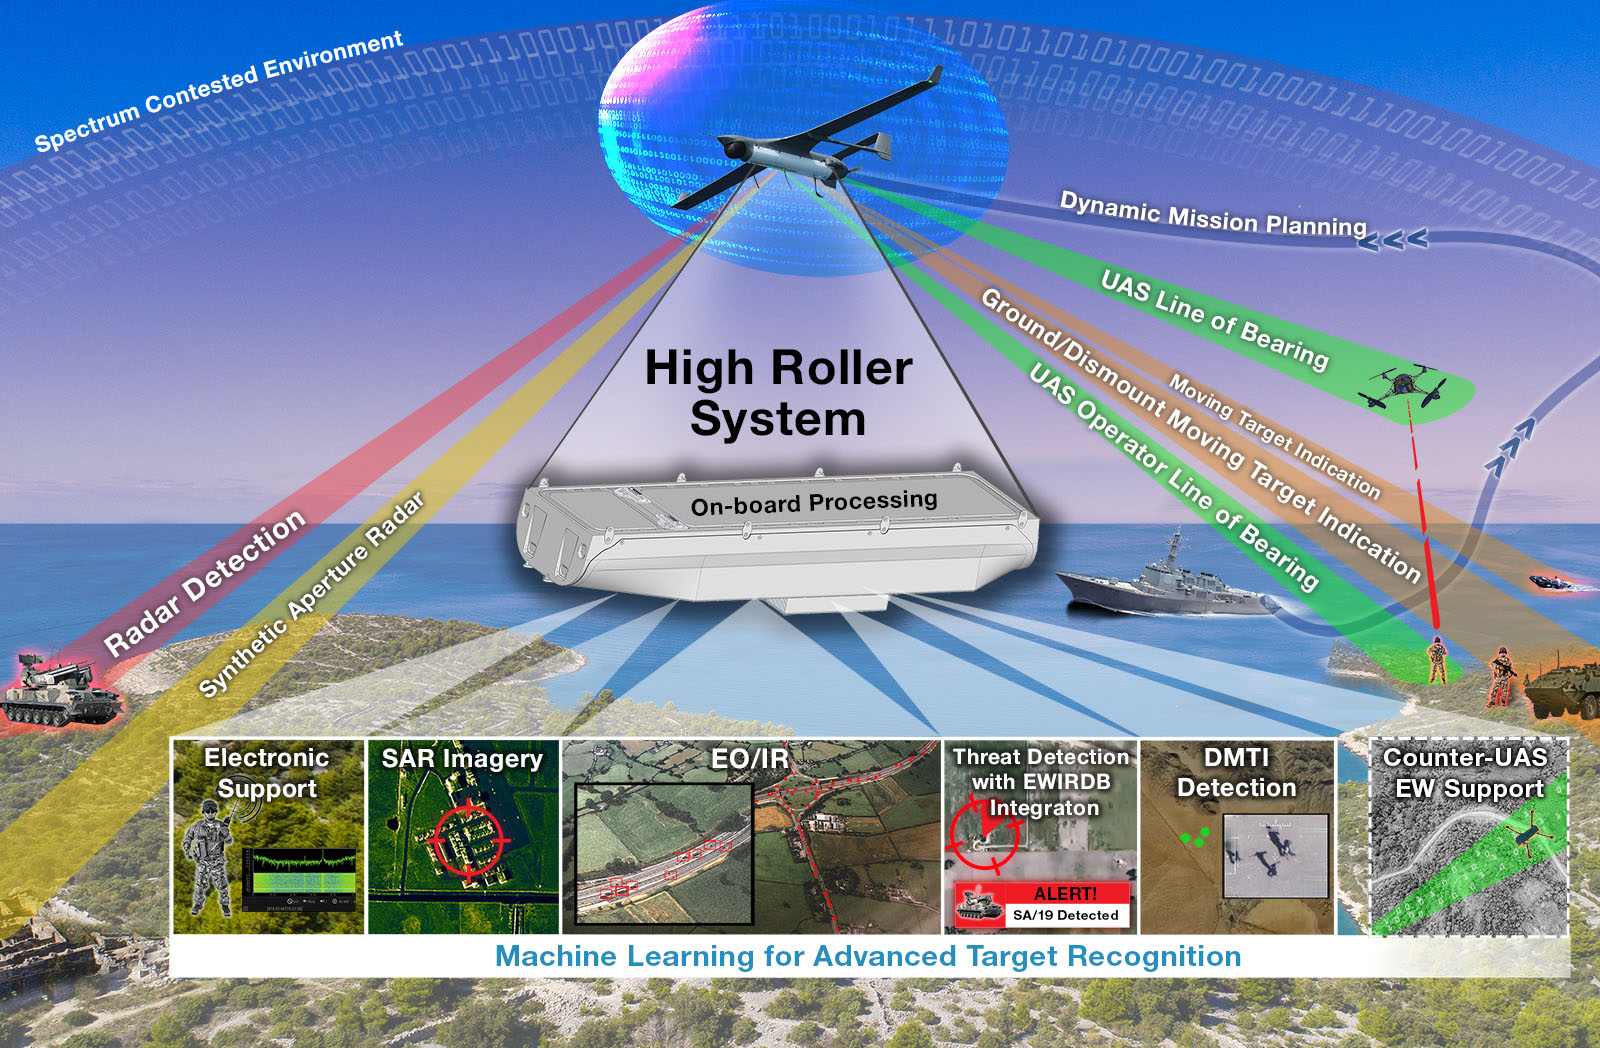 High Roller system flying over multiple targets of nioterest in a concept of operations image